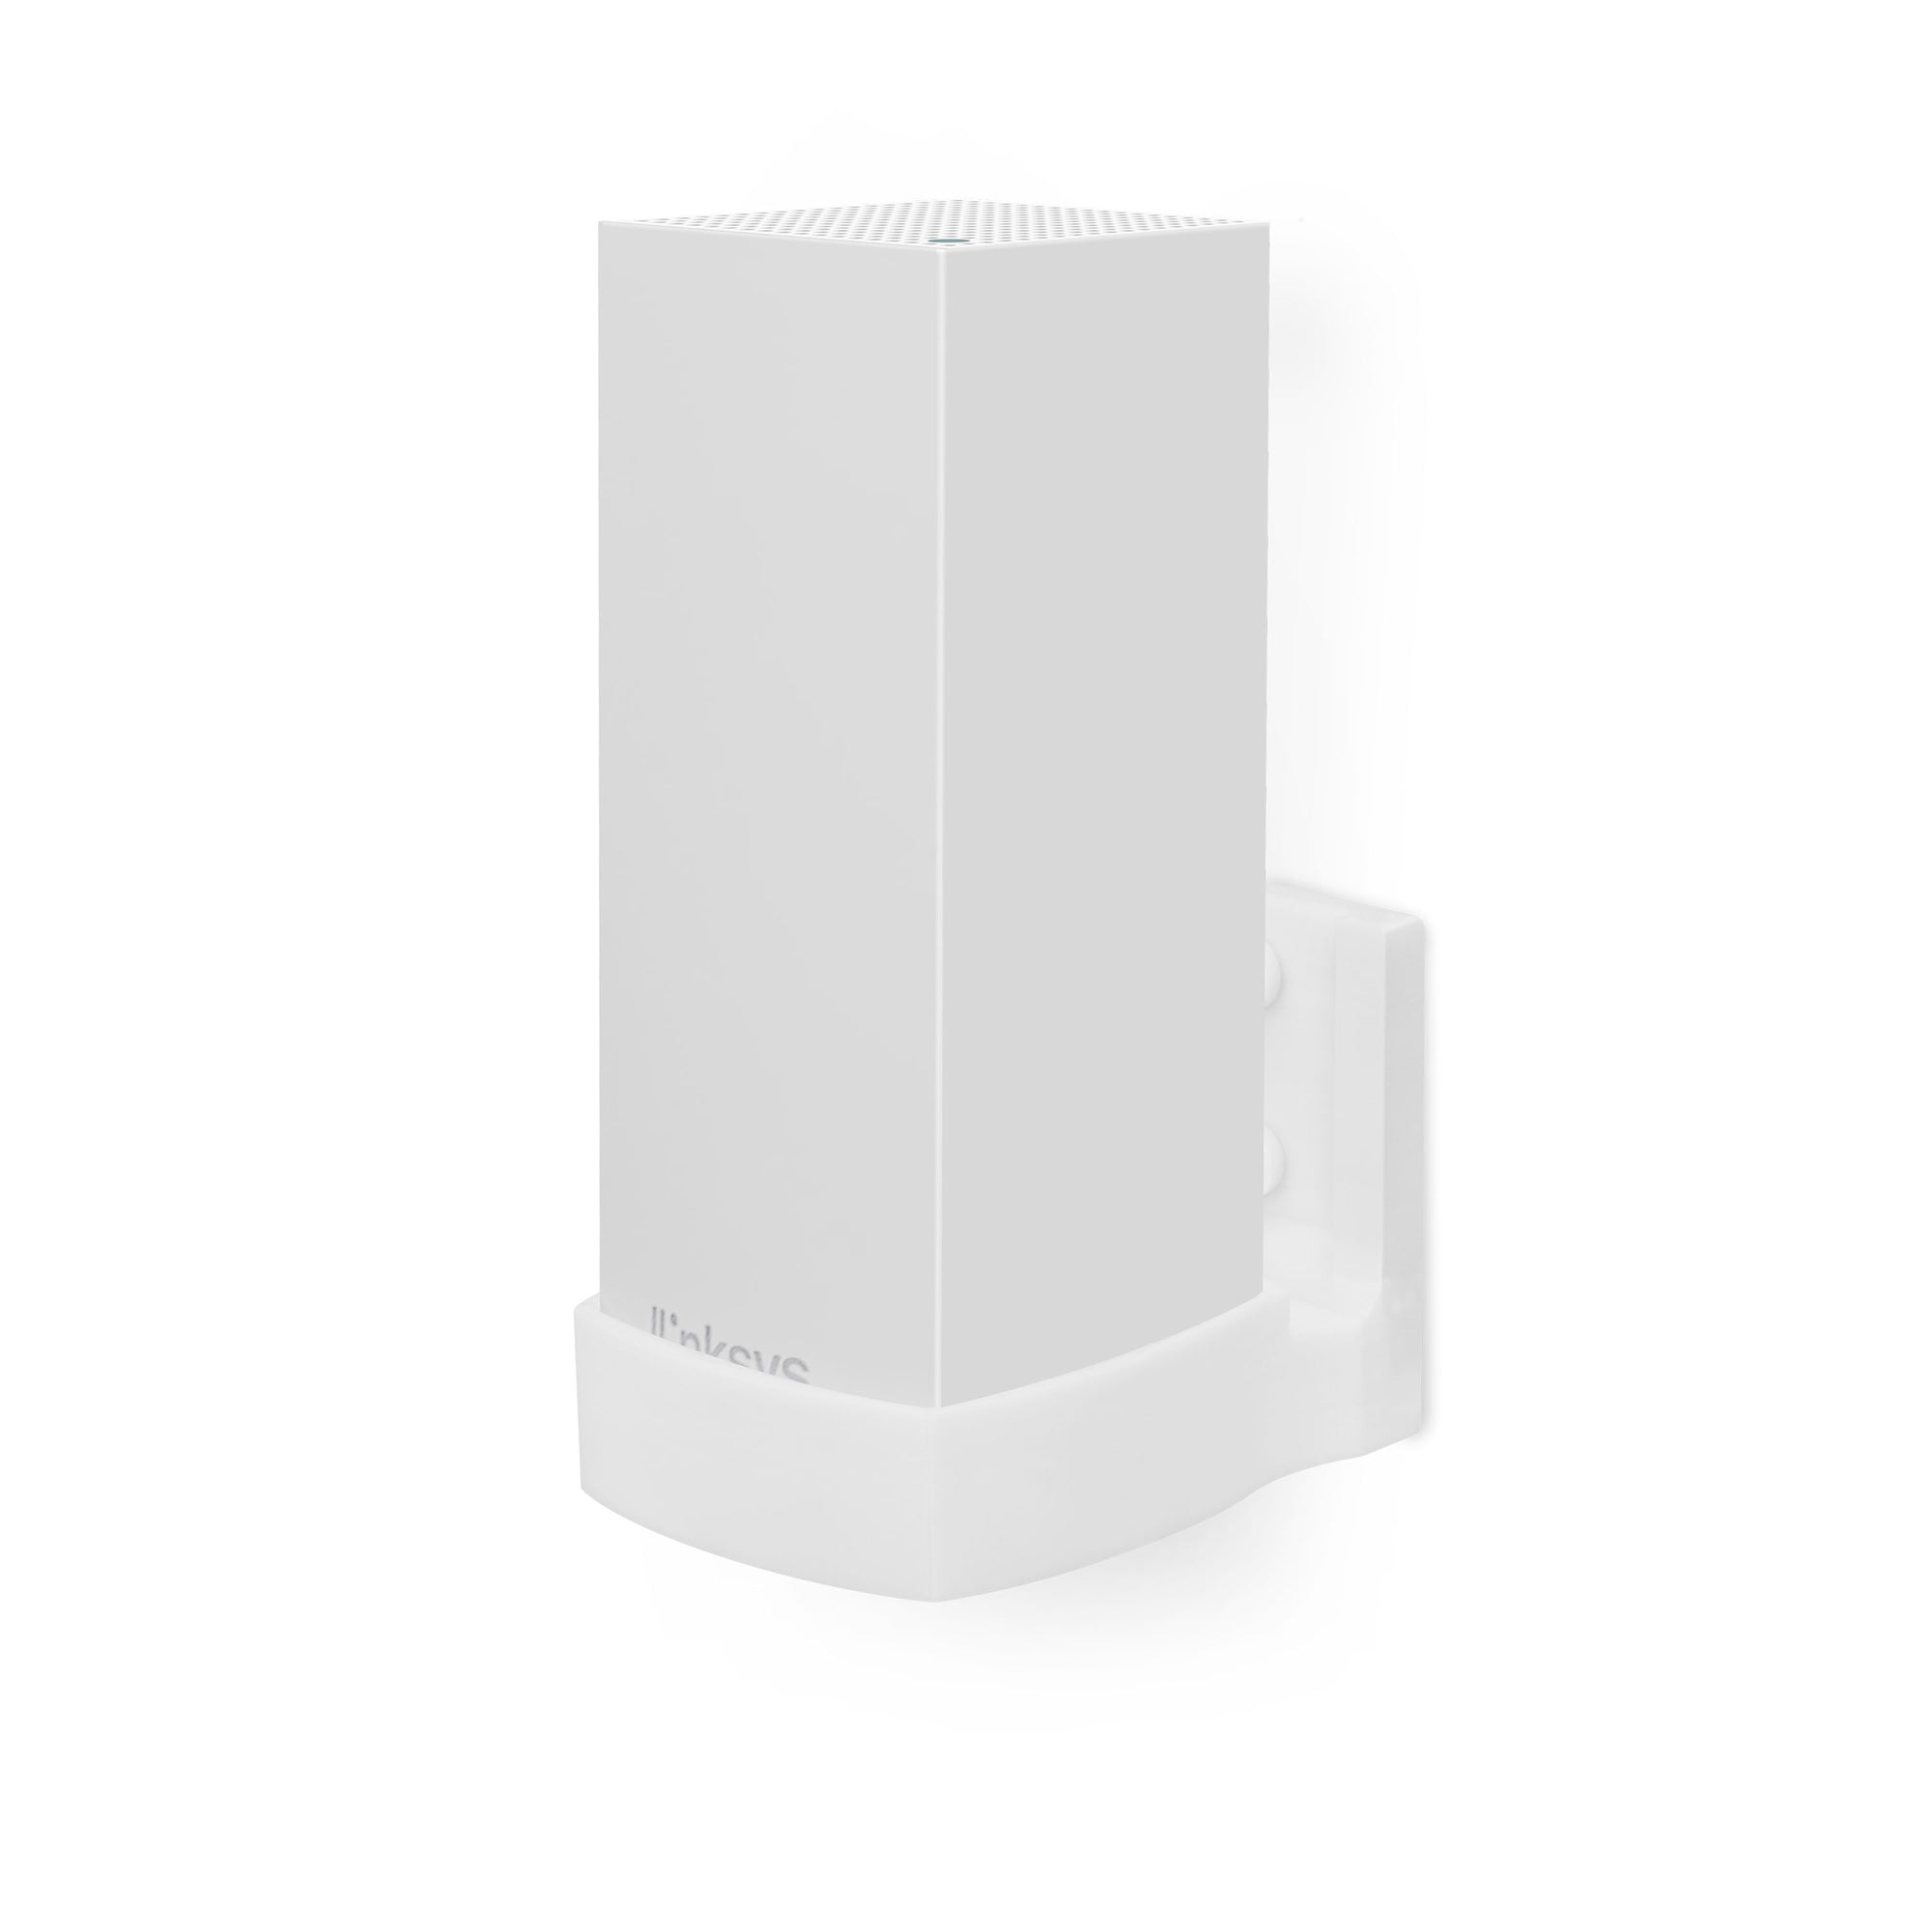 Wall Mount For Linksys Atlas 6 / Atlas Pro 6 WiFi Router, Easy to Install Holder Bracket, Reduce Interference & Clutter